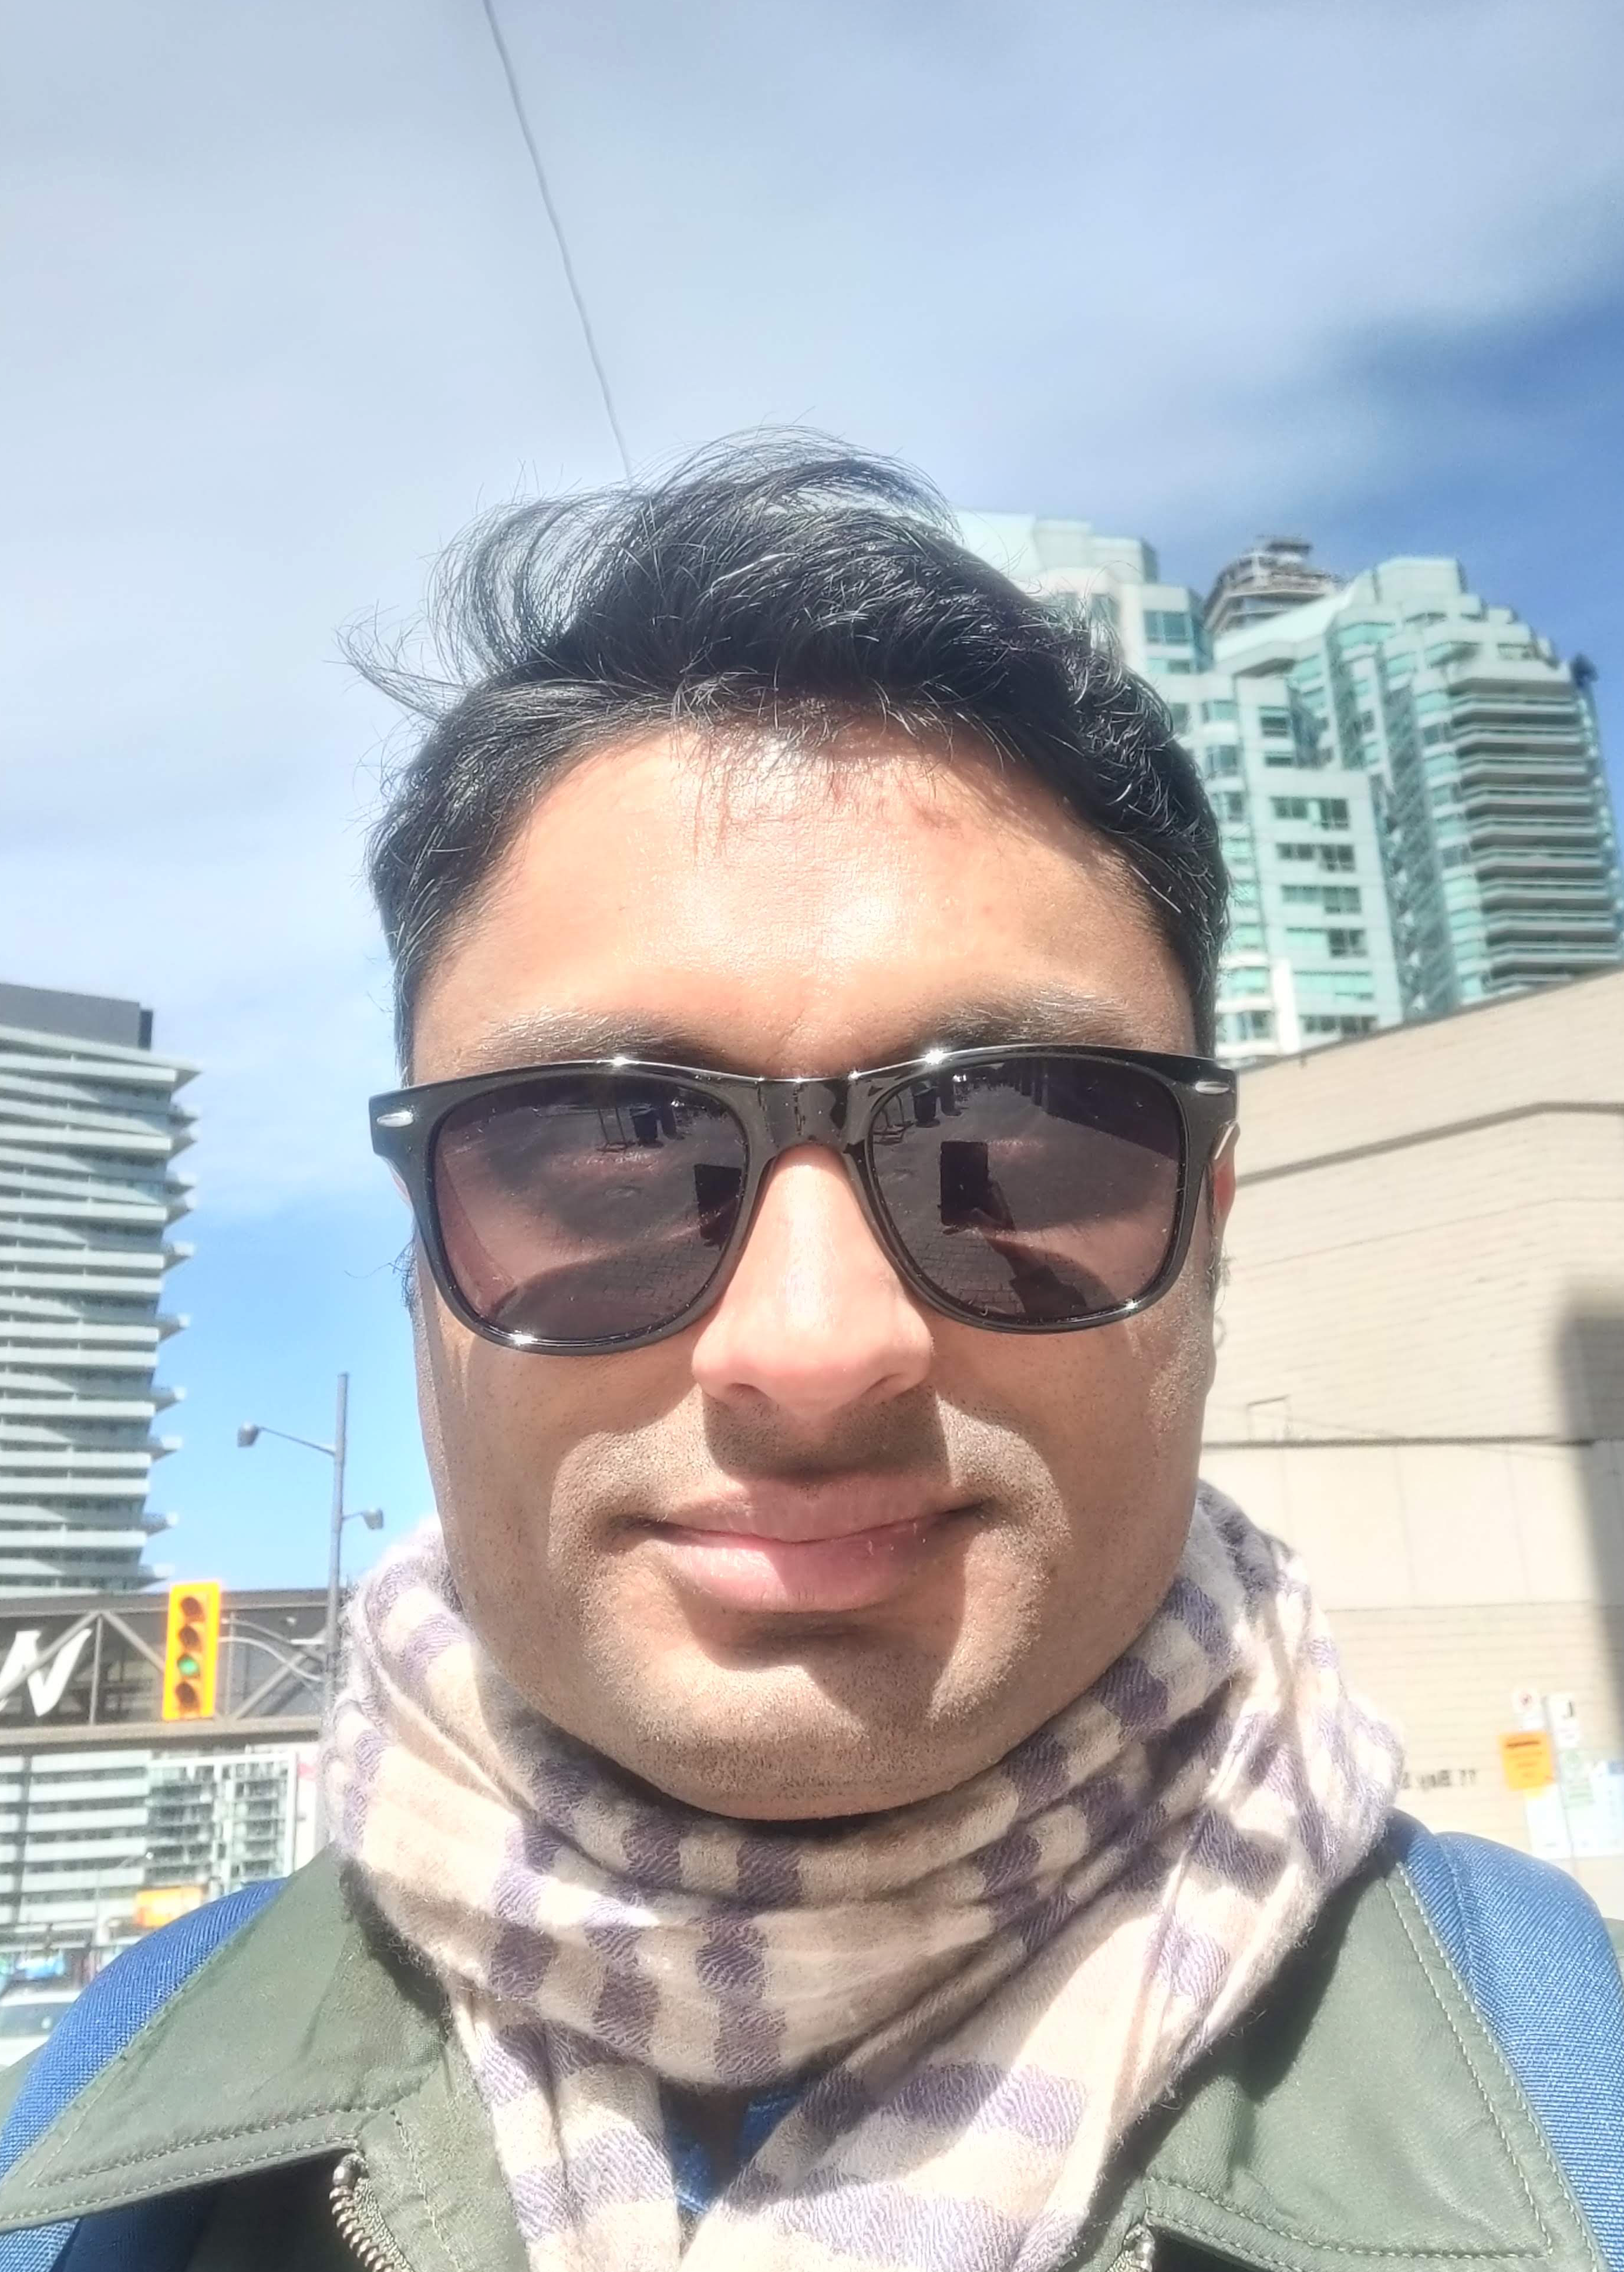 Me, on a glorious spring day in Toronto 😎